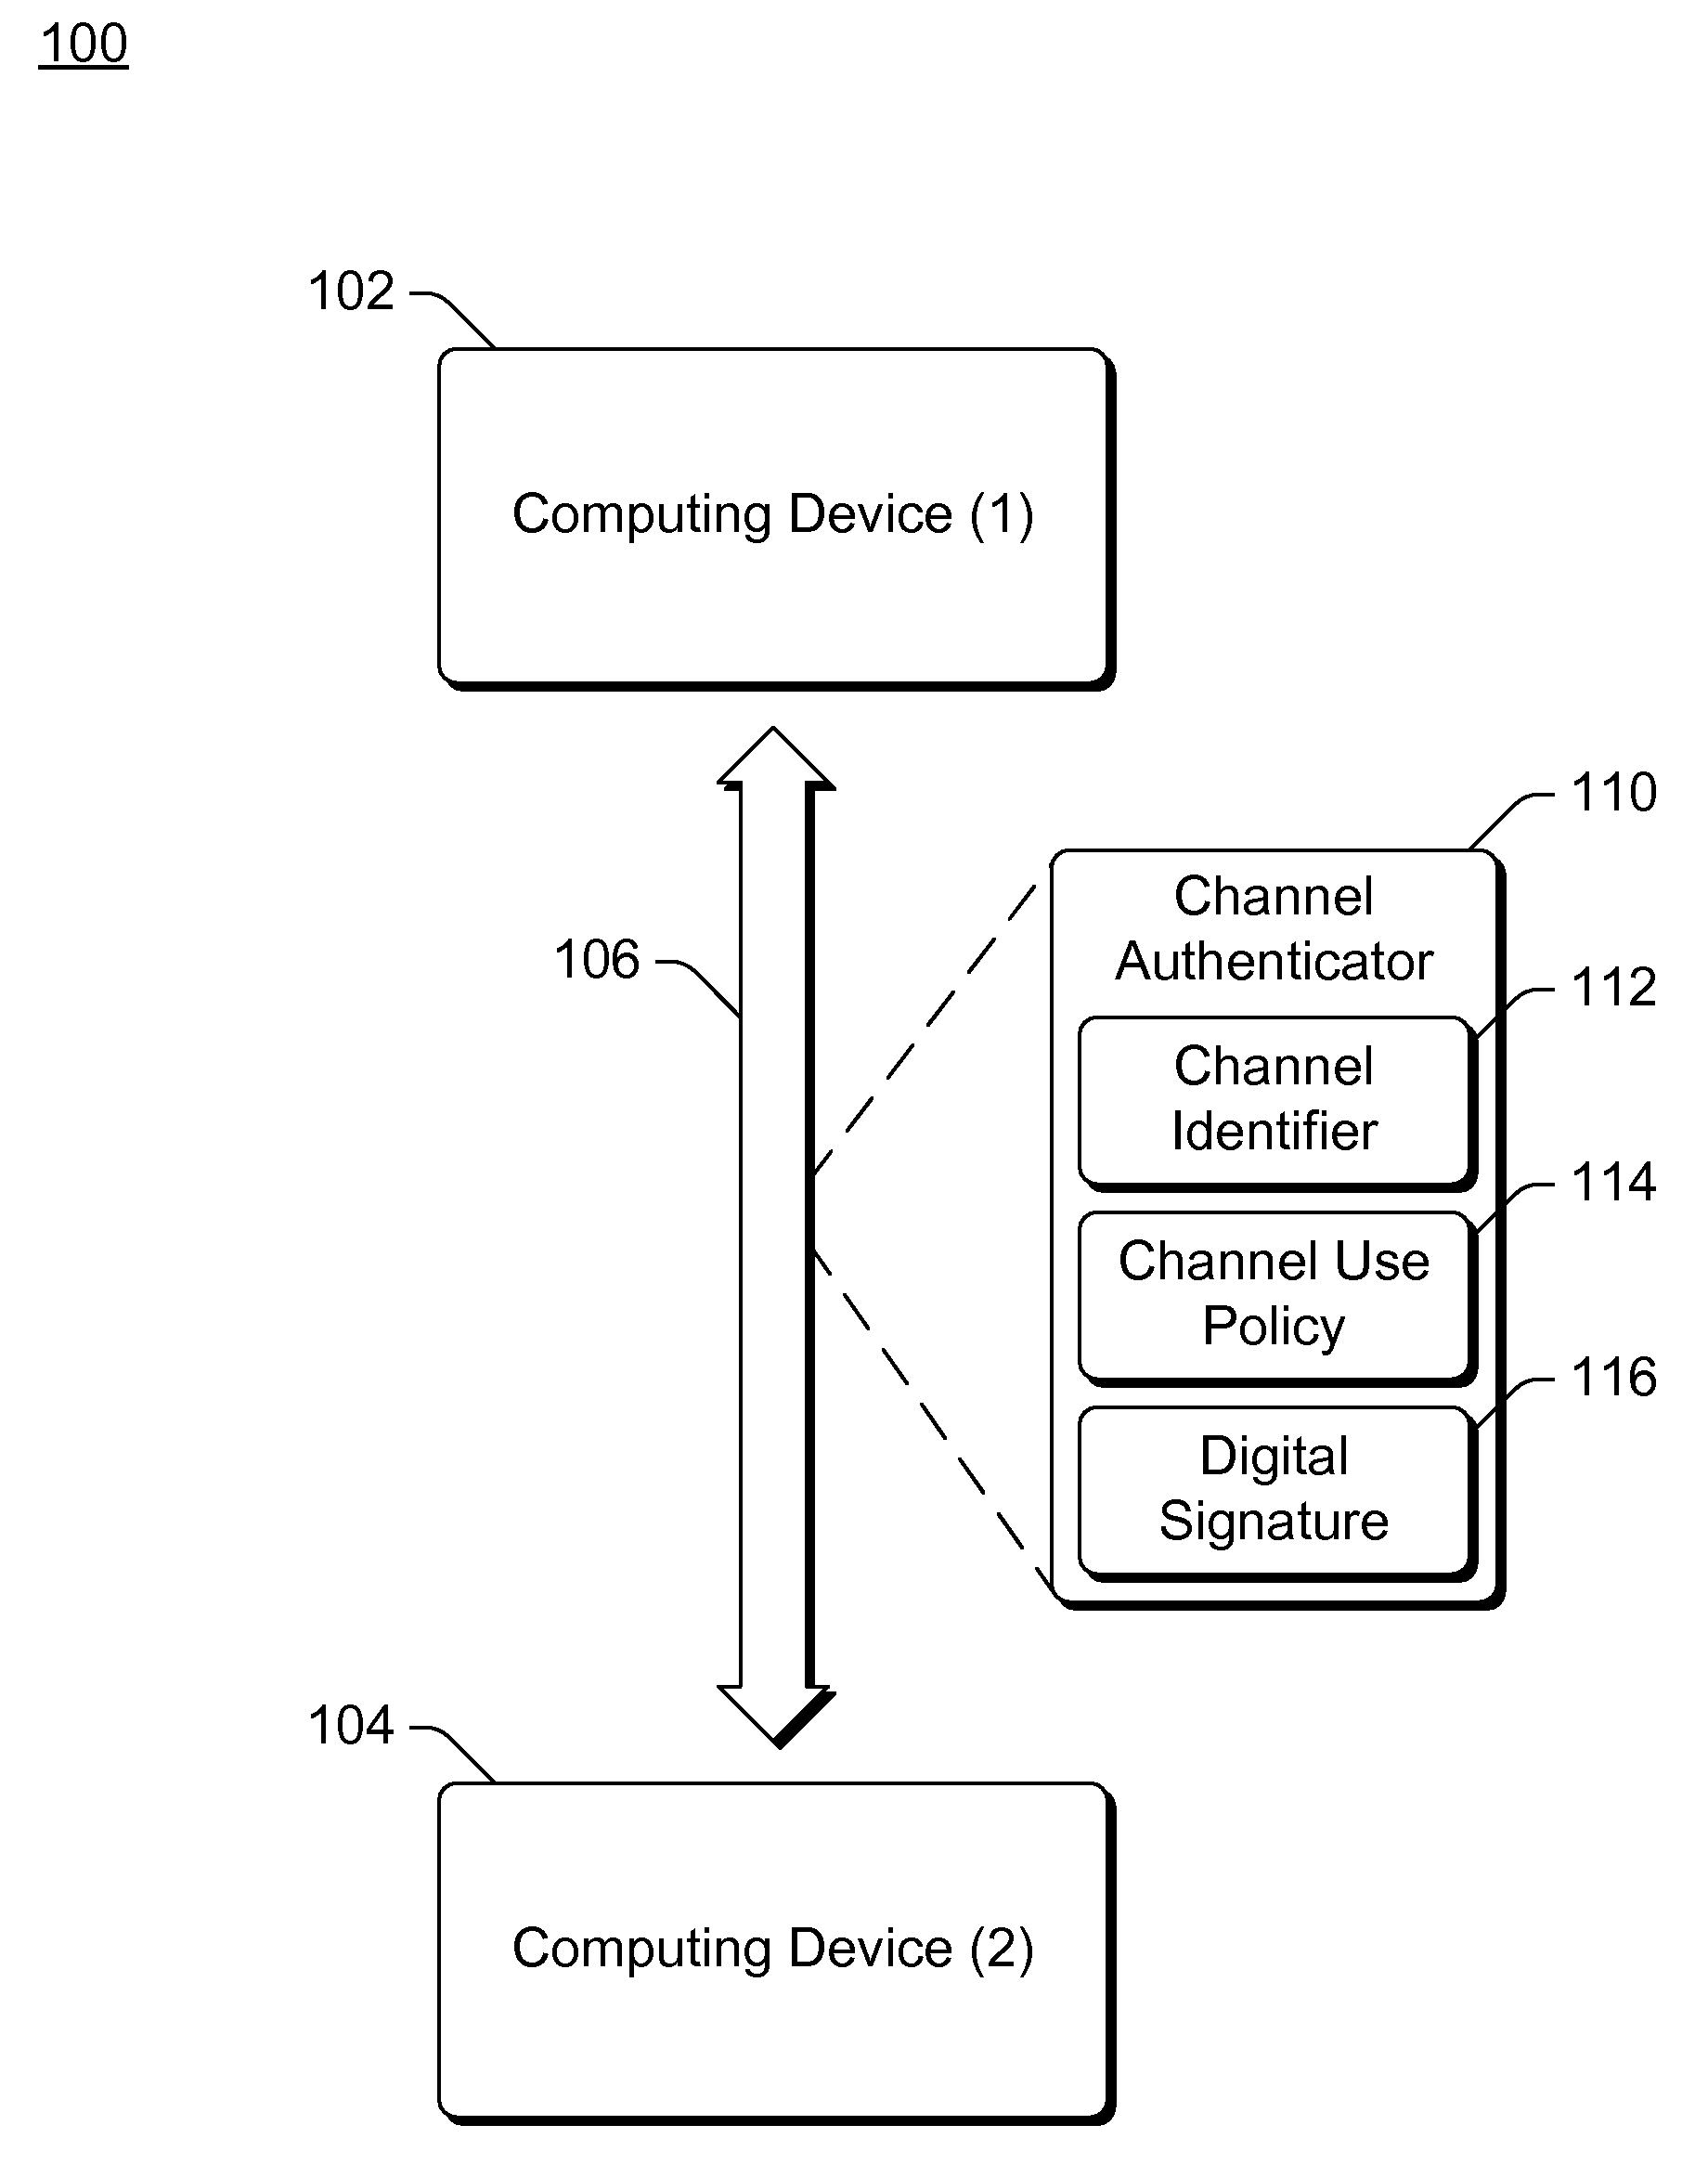 Communication channel access based on channel identifier and use policy